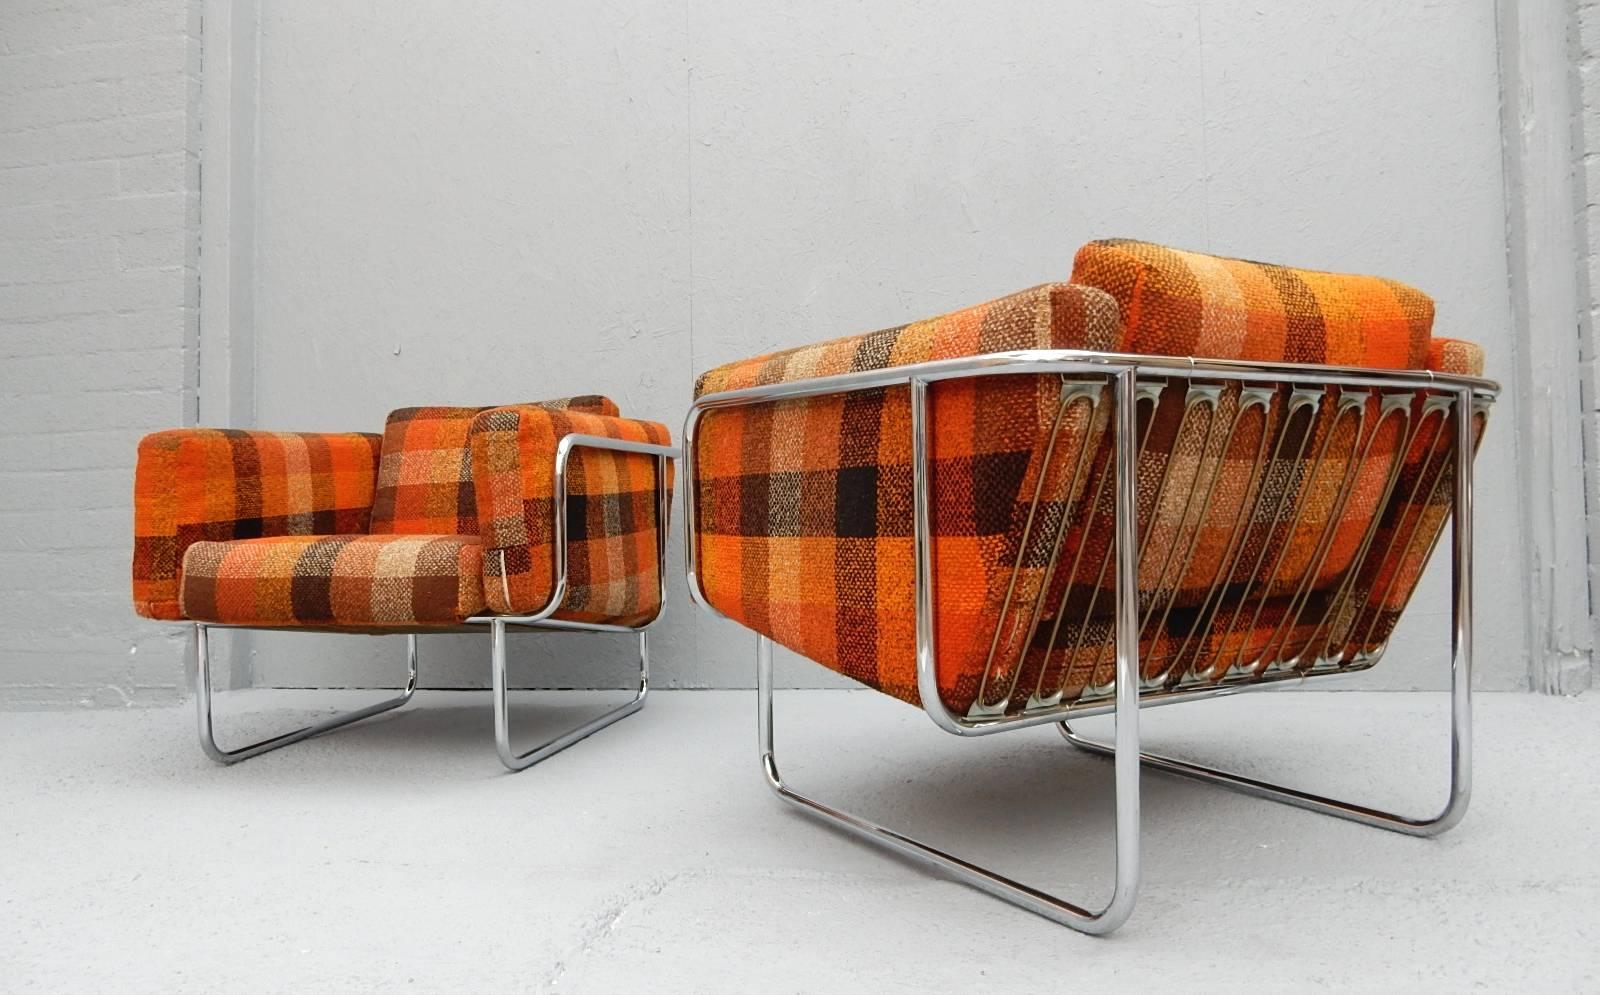 Tubular chrome lounge chairs designed by Hans Eichenberger of Denmark, circa 1960s.
Gorgeous original plaid wool upholstery in bold bright colors.
Very comfortable plush lounge chairs.
   